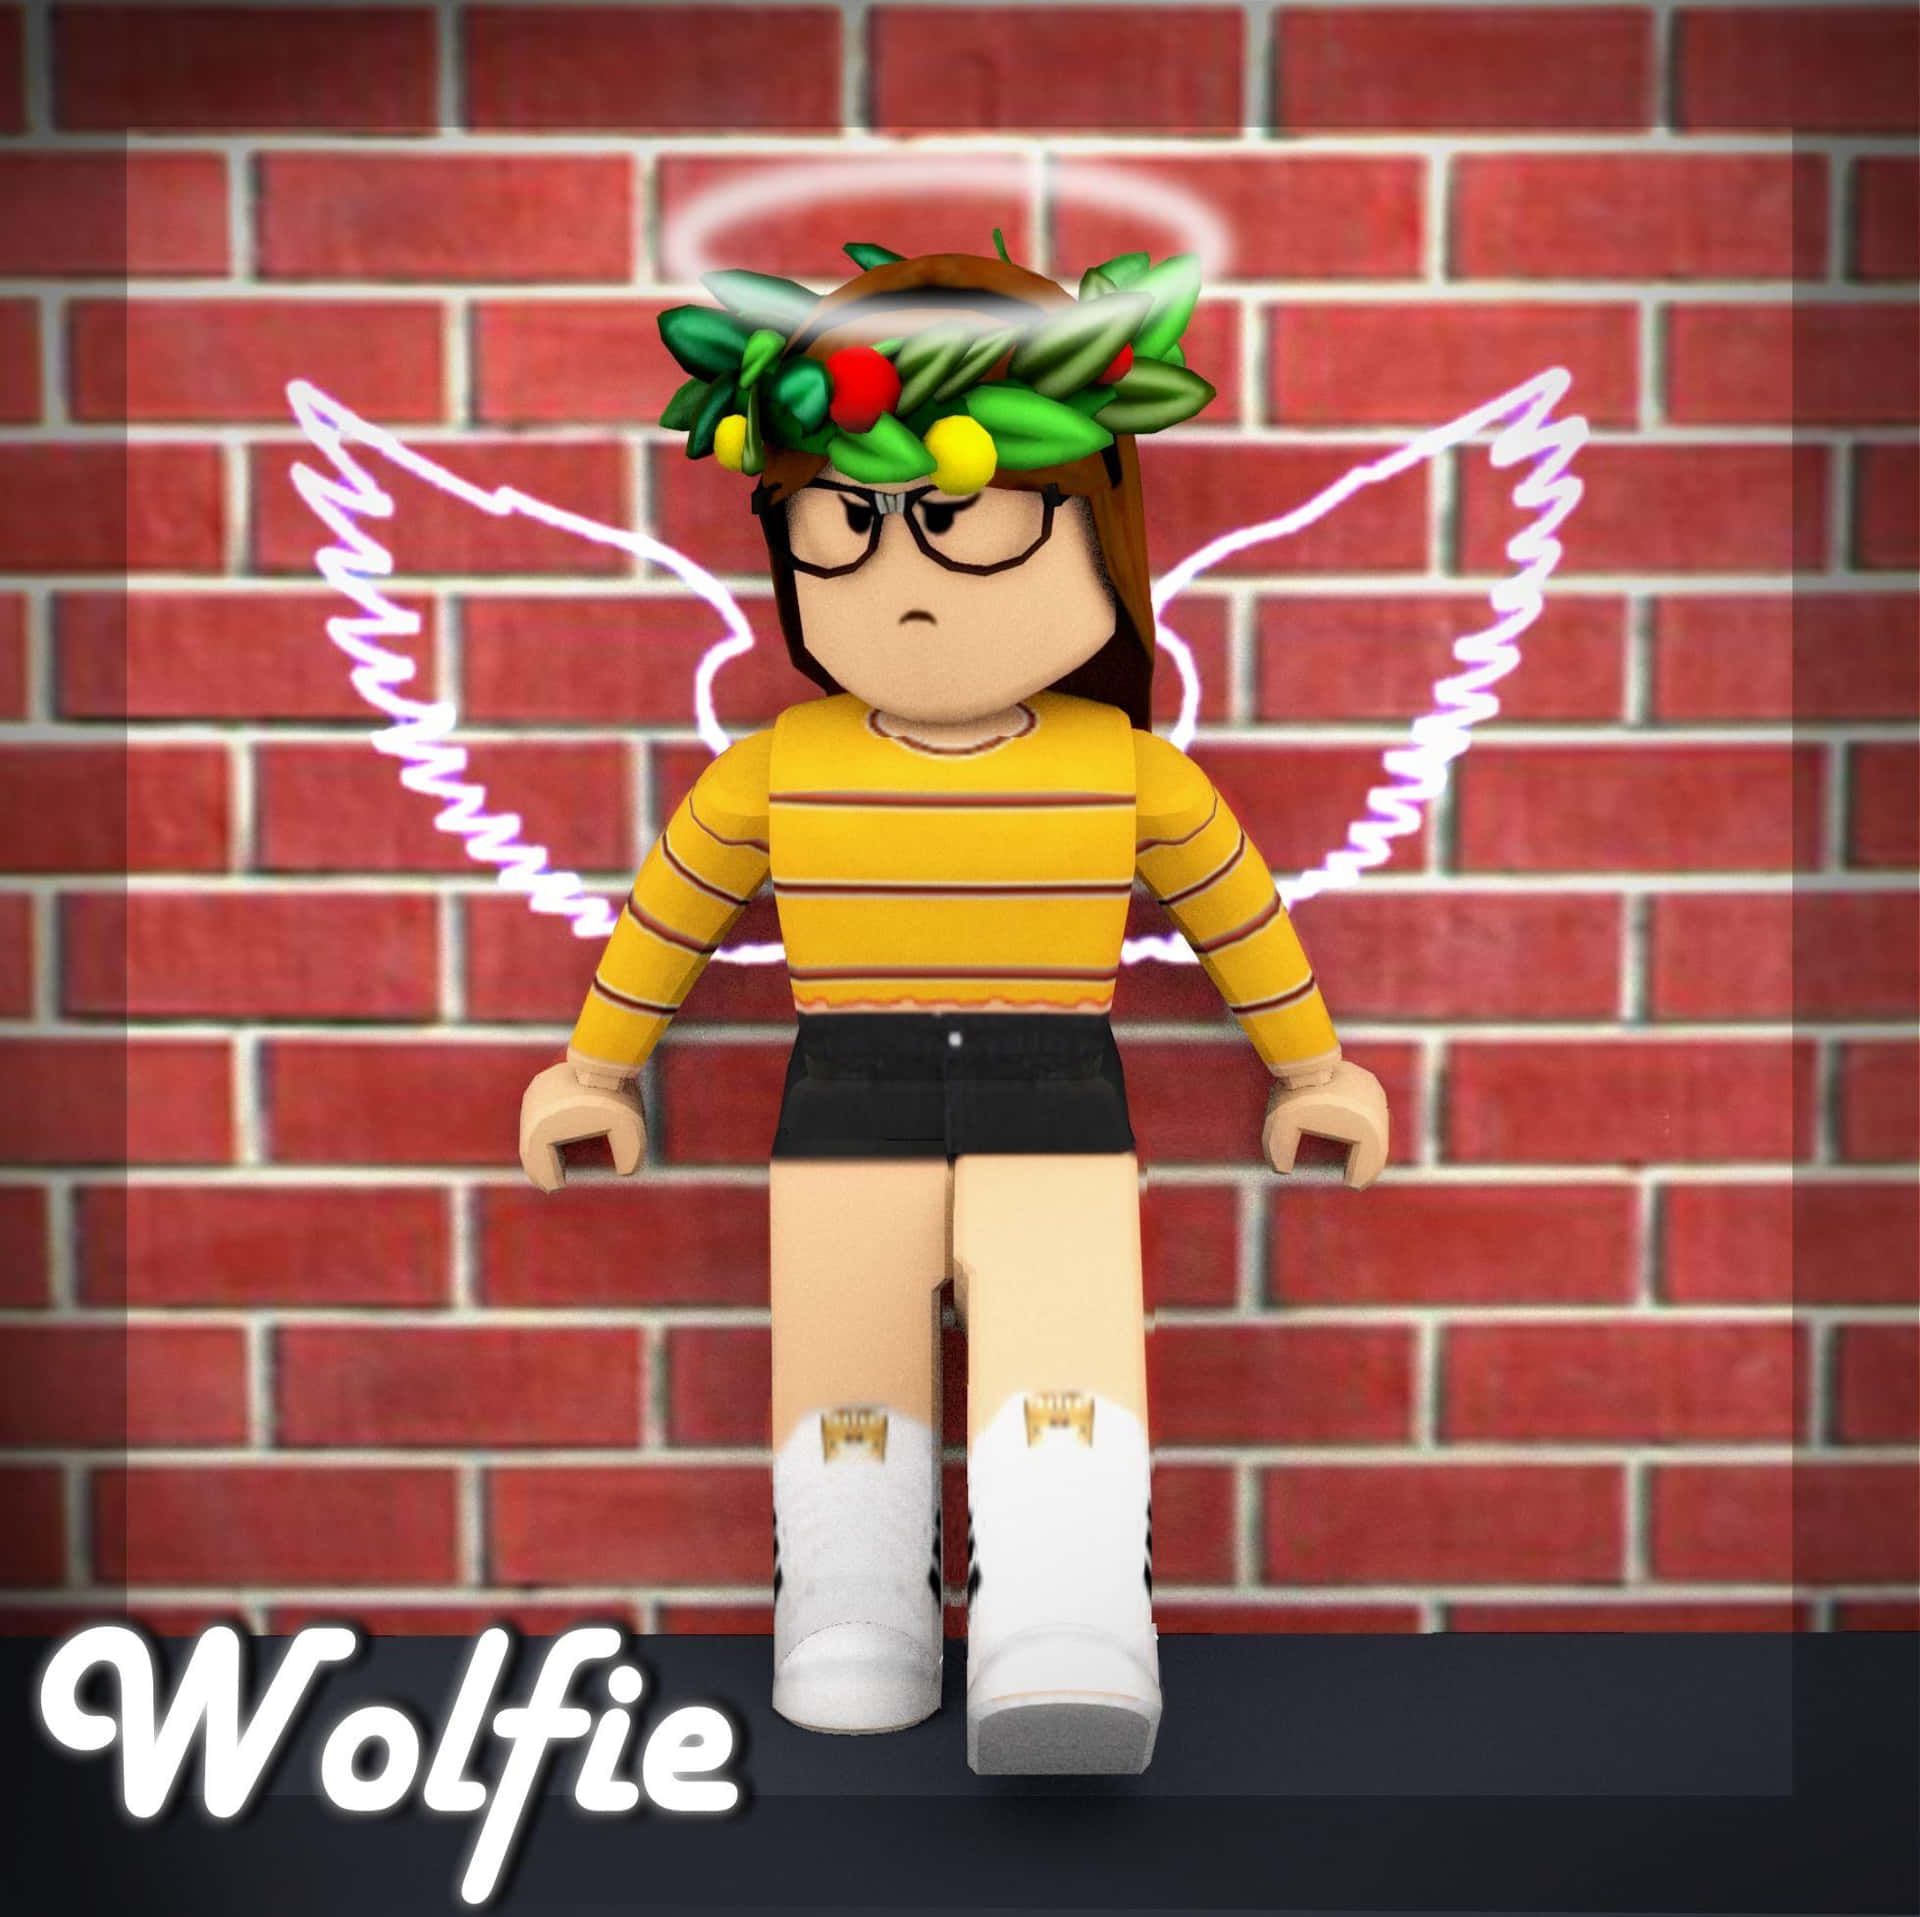 Animated Character Wolfie Against Brick Wall Background